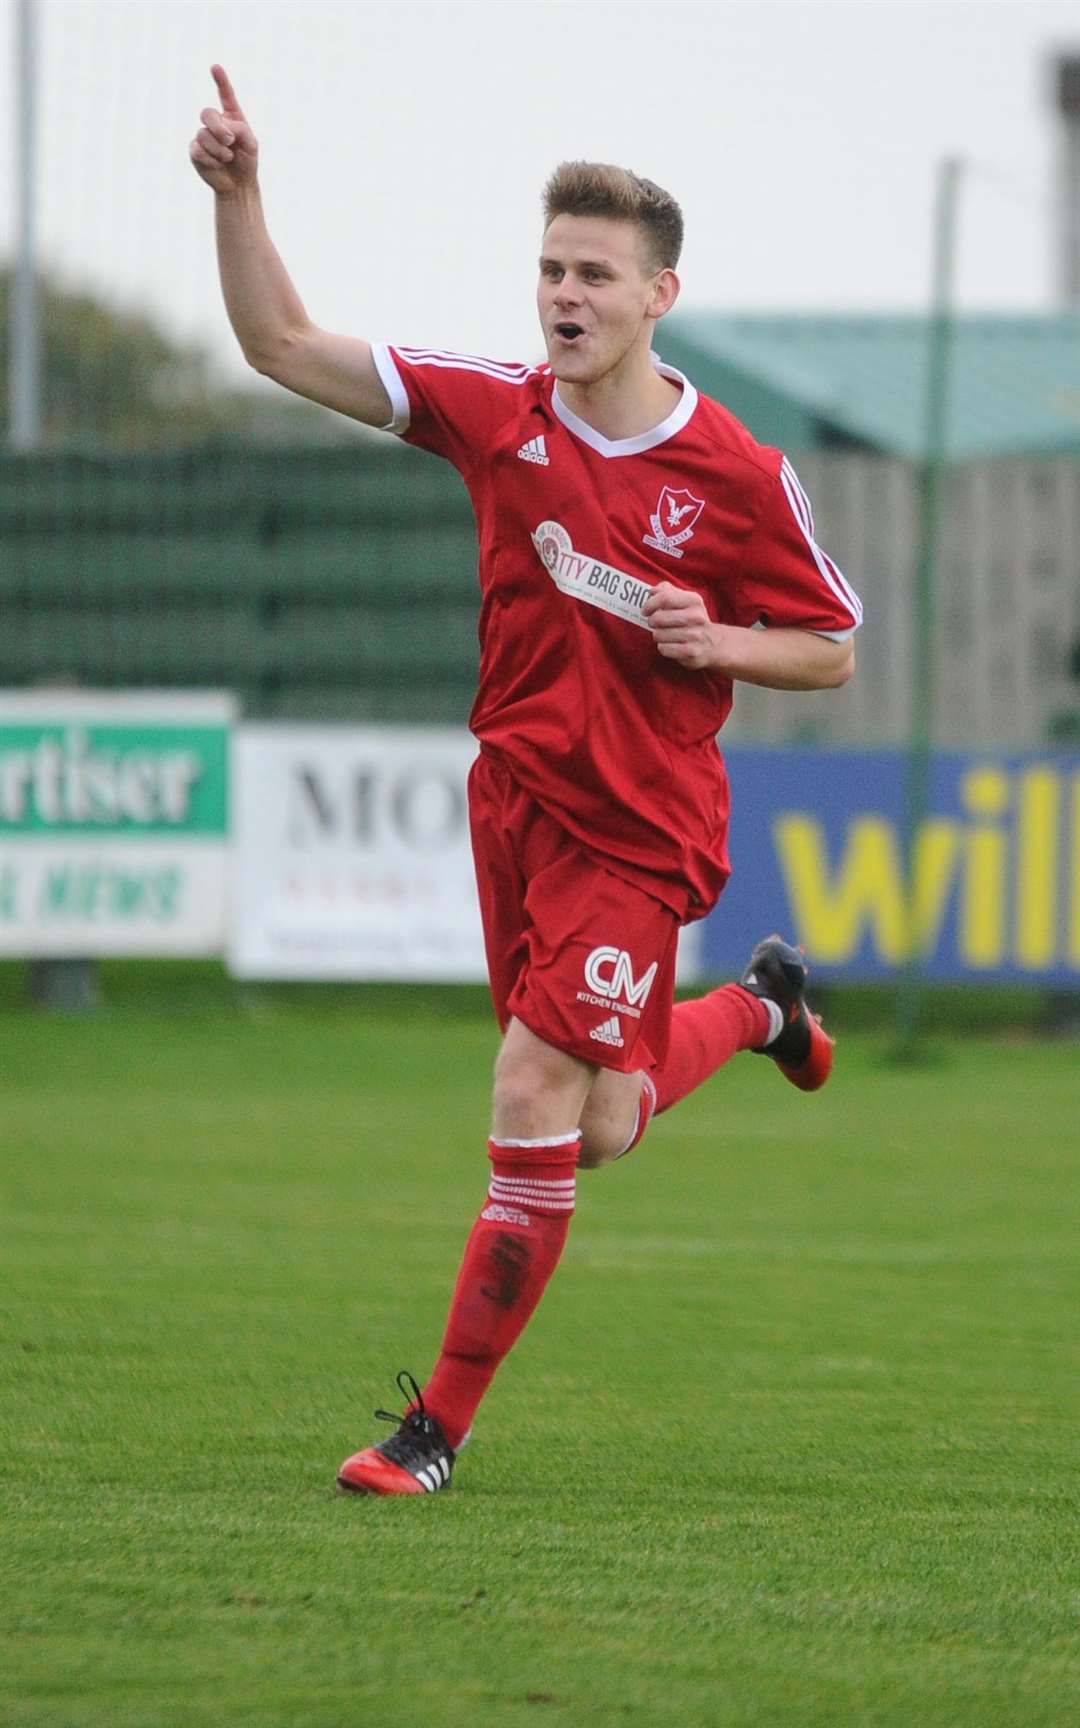 Grant Noble was Vale's sole attacker against Strathspey and came up with a goal.